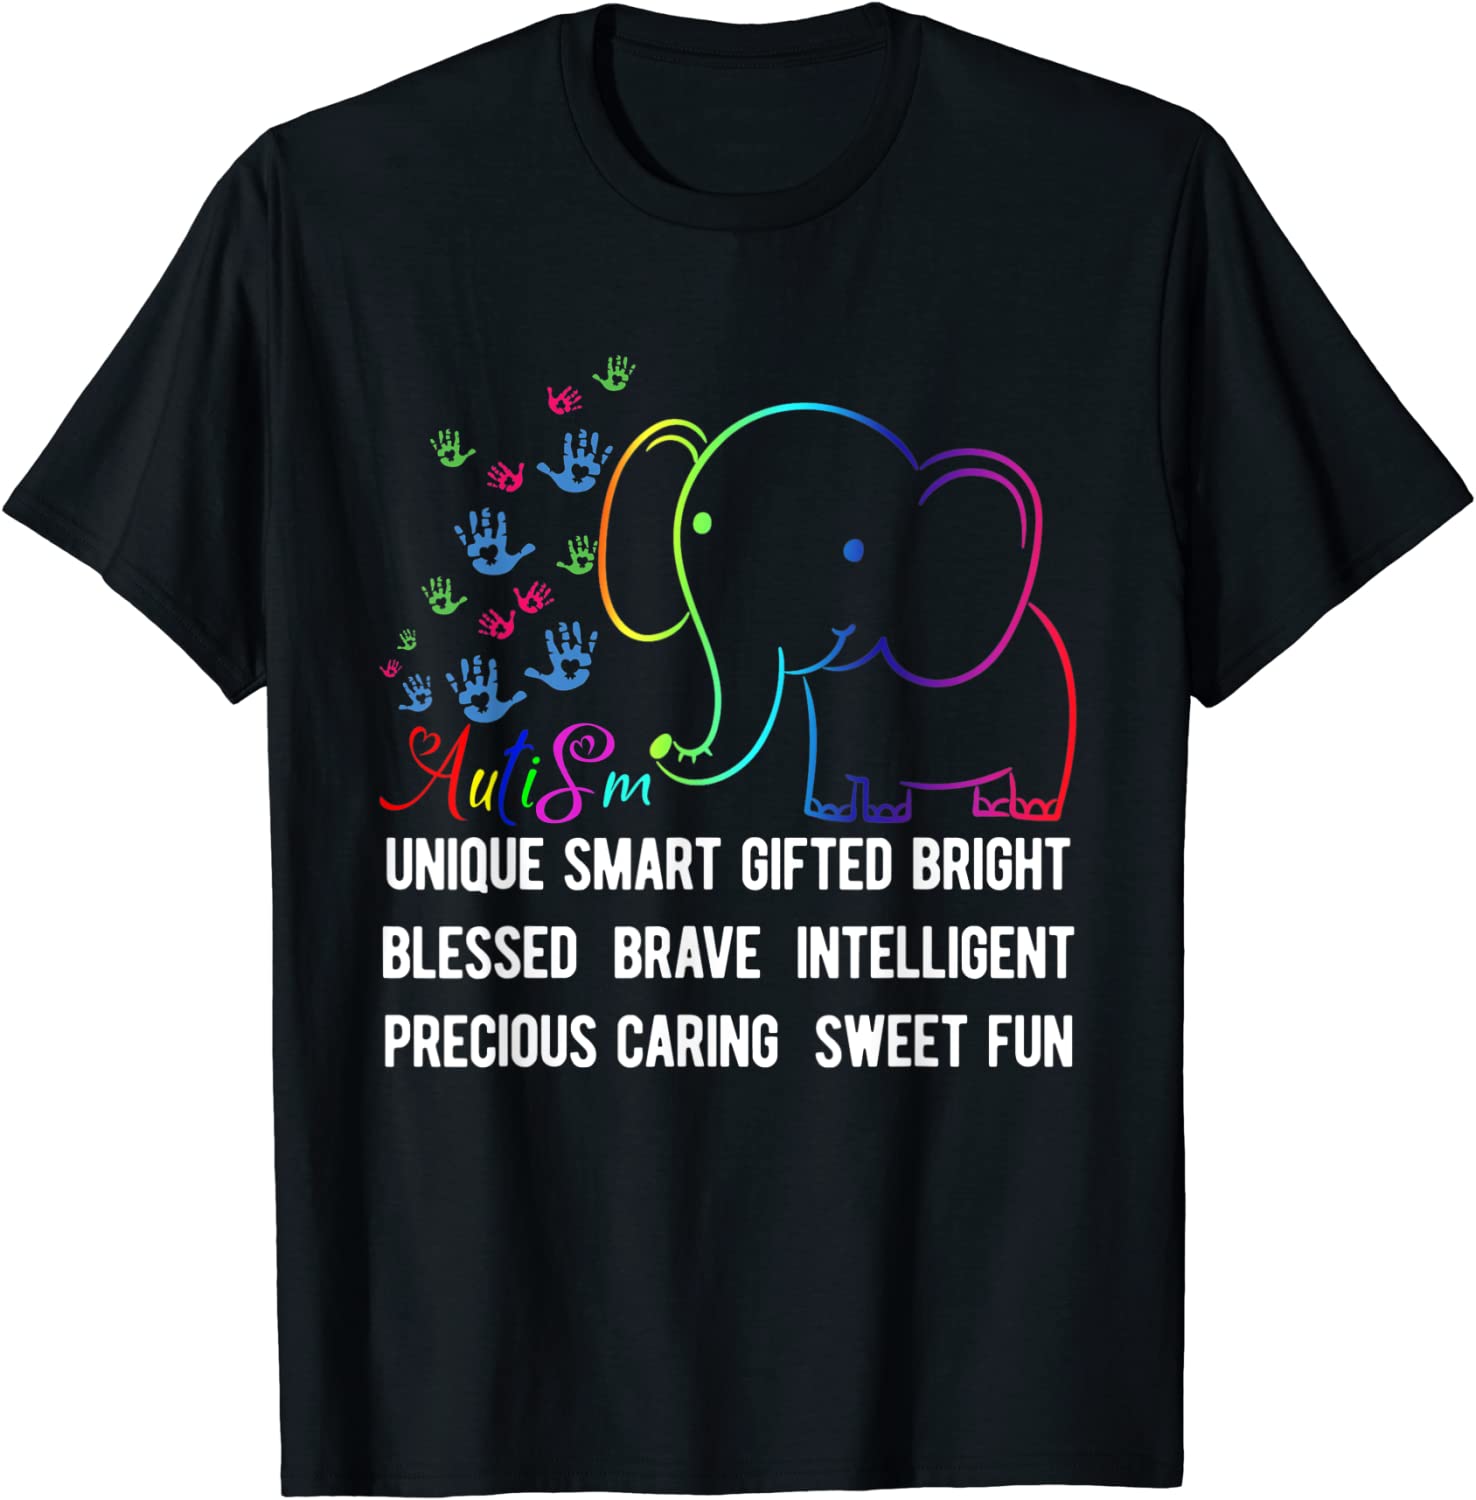 Unique Smart Gifted Bright Blessed Brave Intelligent T-Shirt Best Price